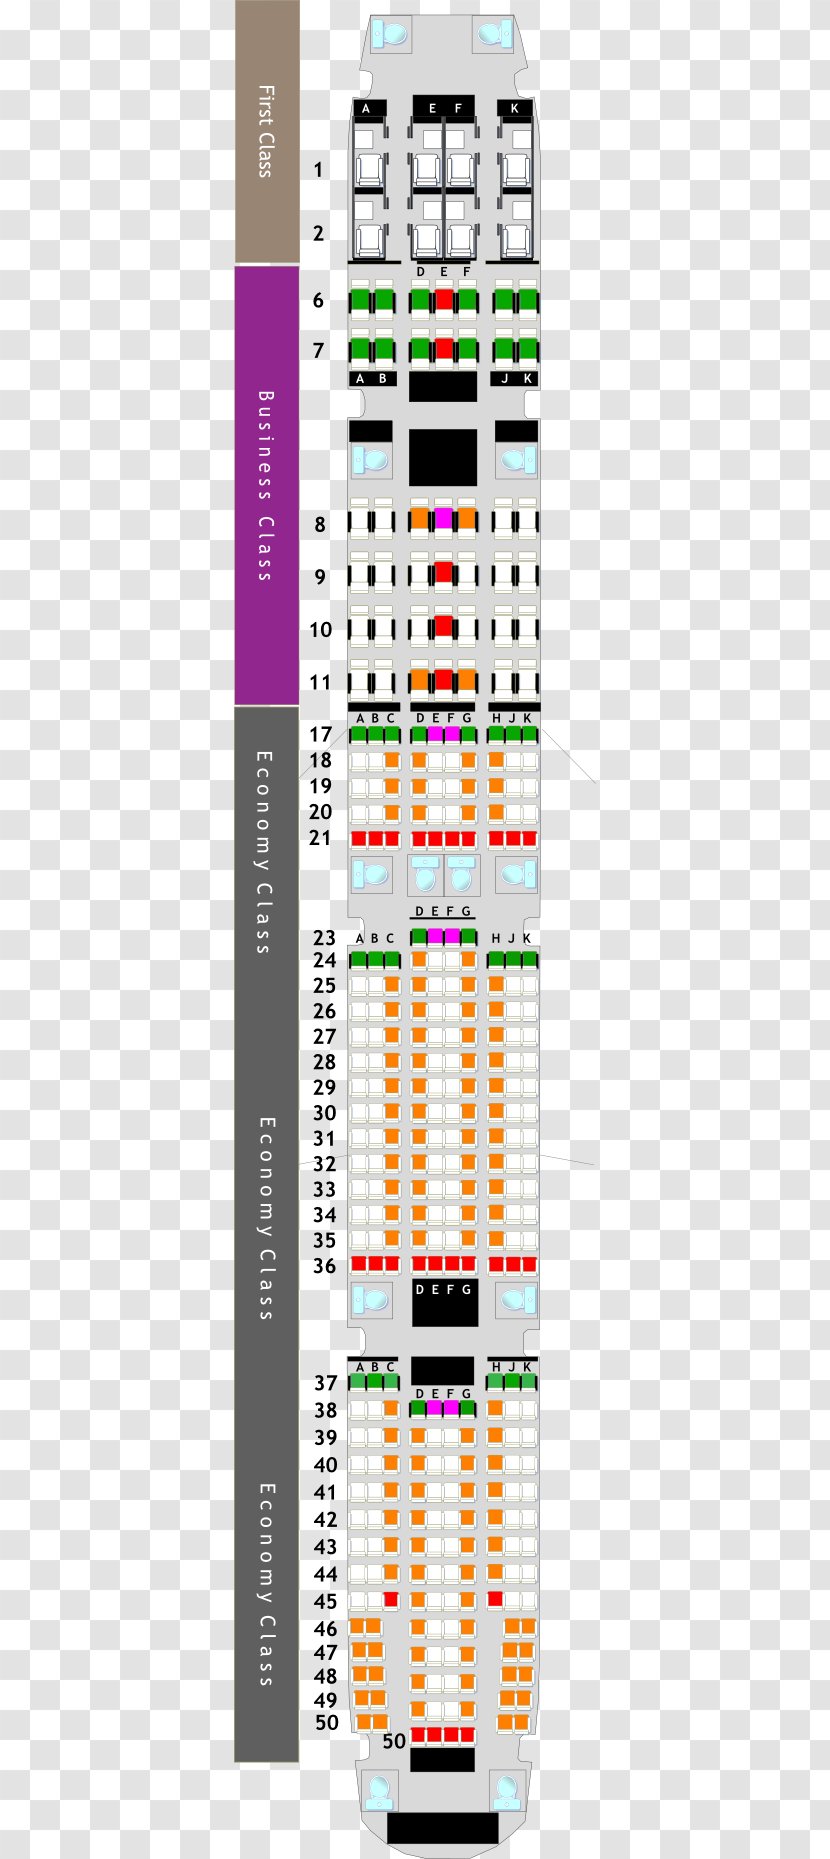 Boeing 777-300ER Airbus A380 Airline Seat - Aircraft Map - 777 Transparent PNG